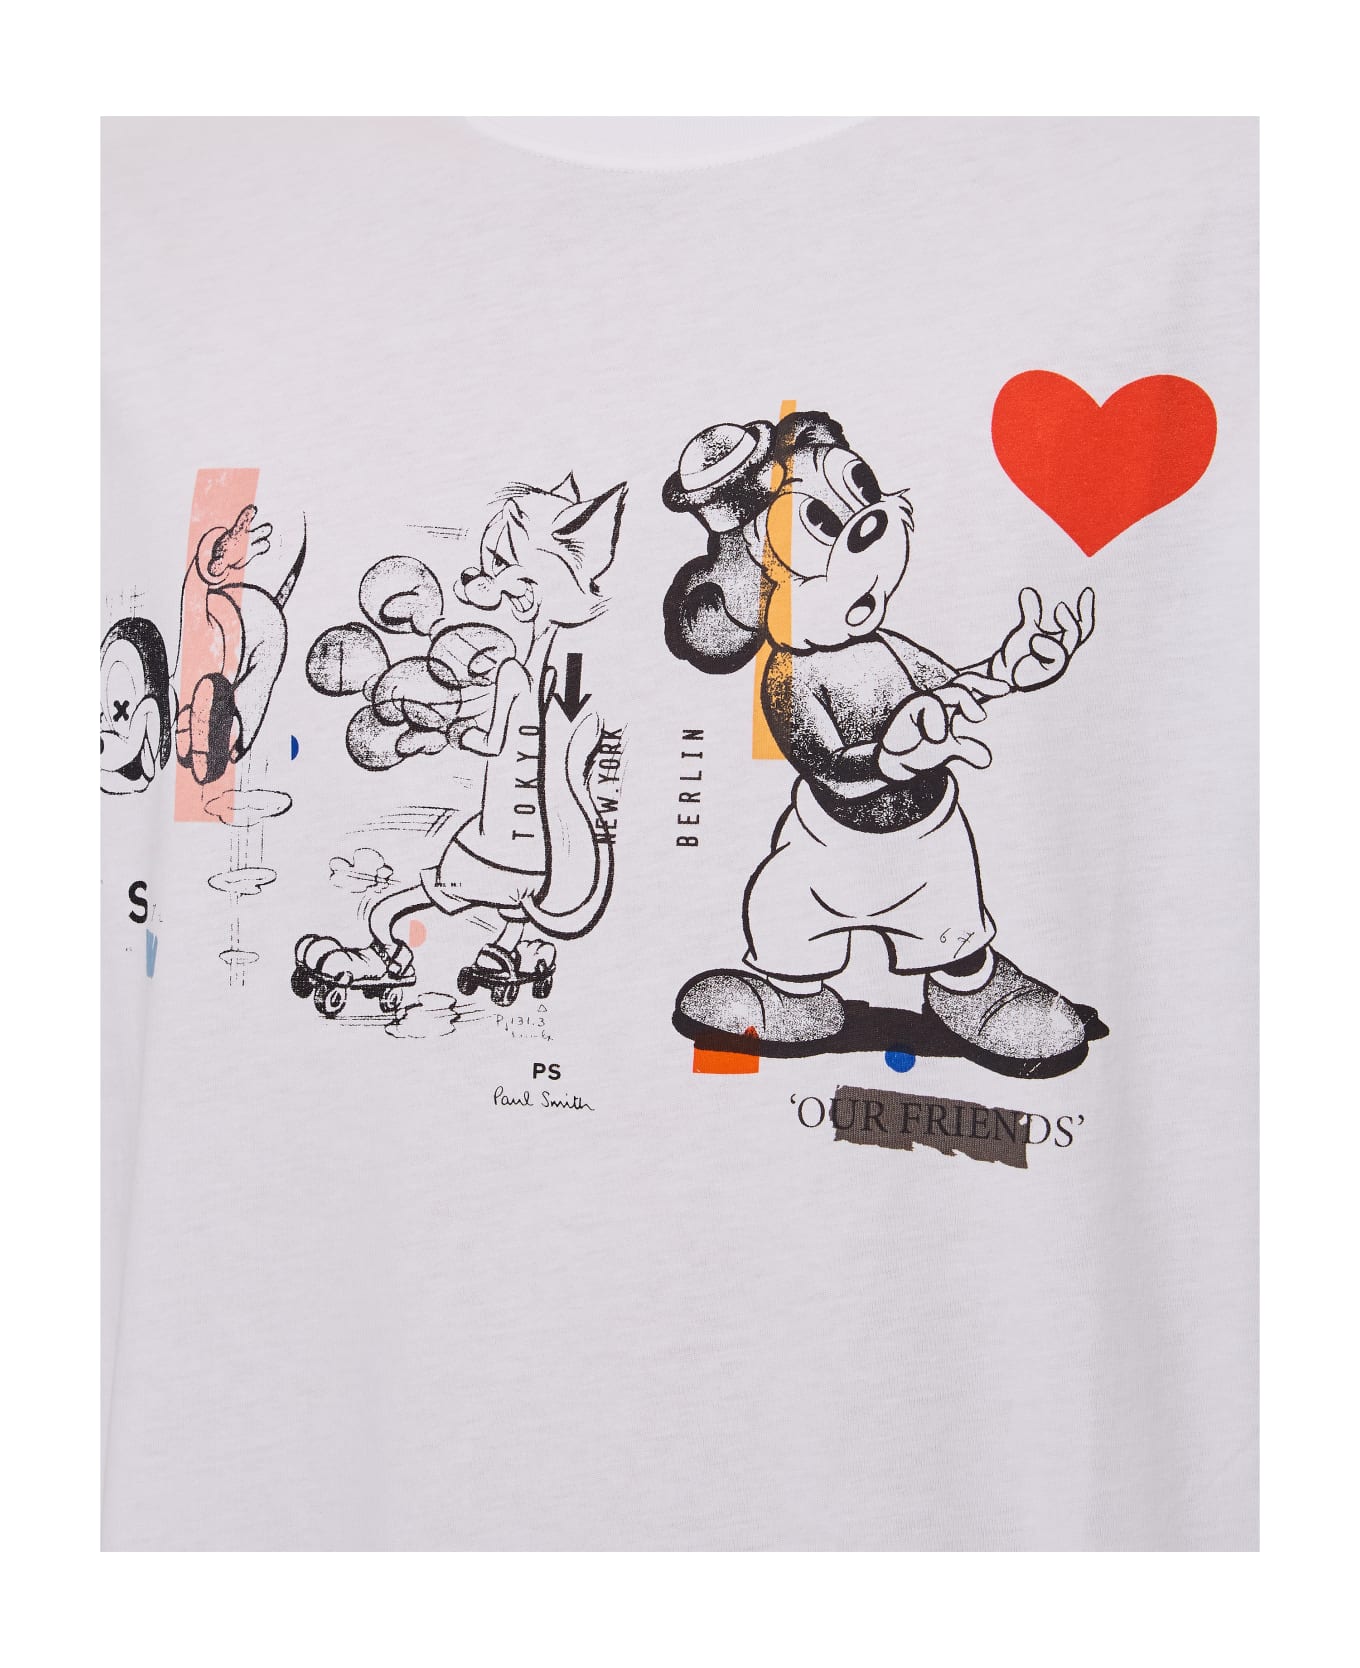 PS by Paul Smith Cotton Cartoon T-shirt - WHITE